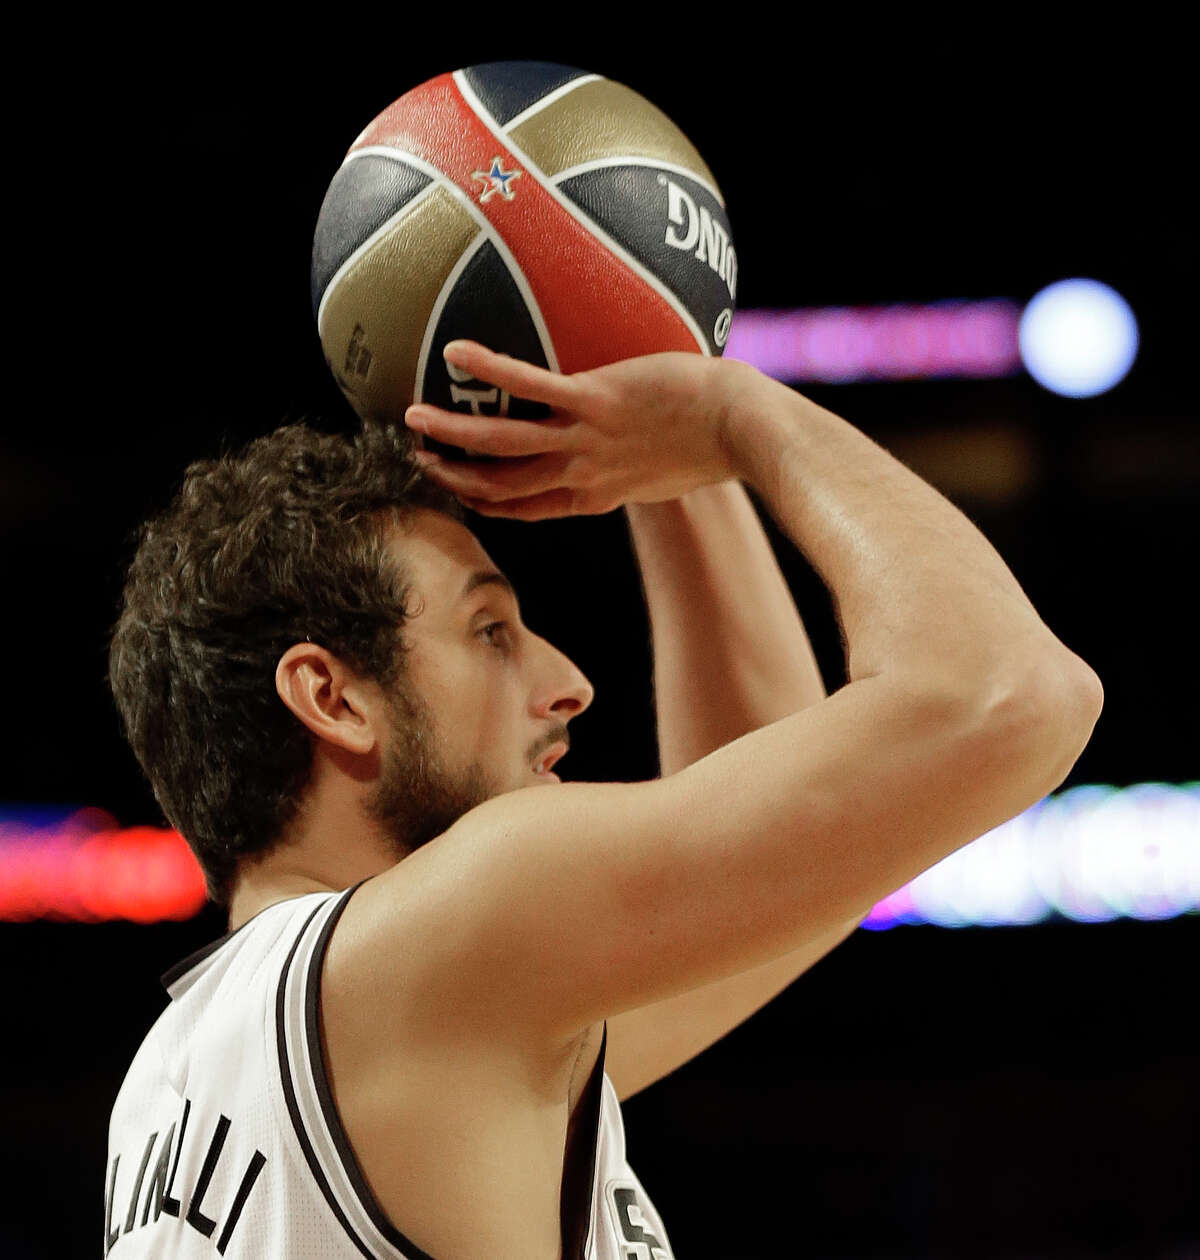 Marco Belinelli of the San Antonio Spurs shoots during the skills competition at the NBA All Star basketball game, Saturday, Feb. 15, 2014, in New Orleans. (AP Photo/Gerald Herbert)